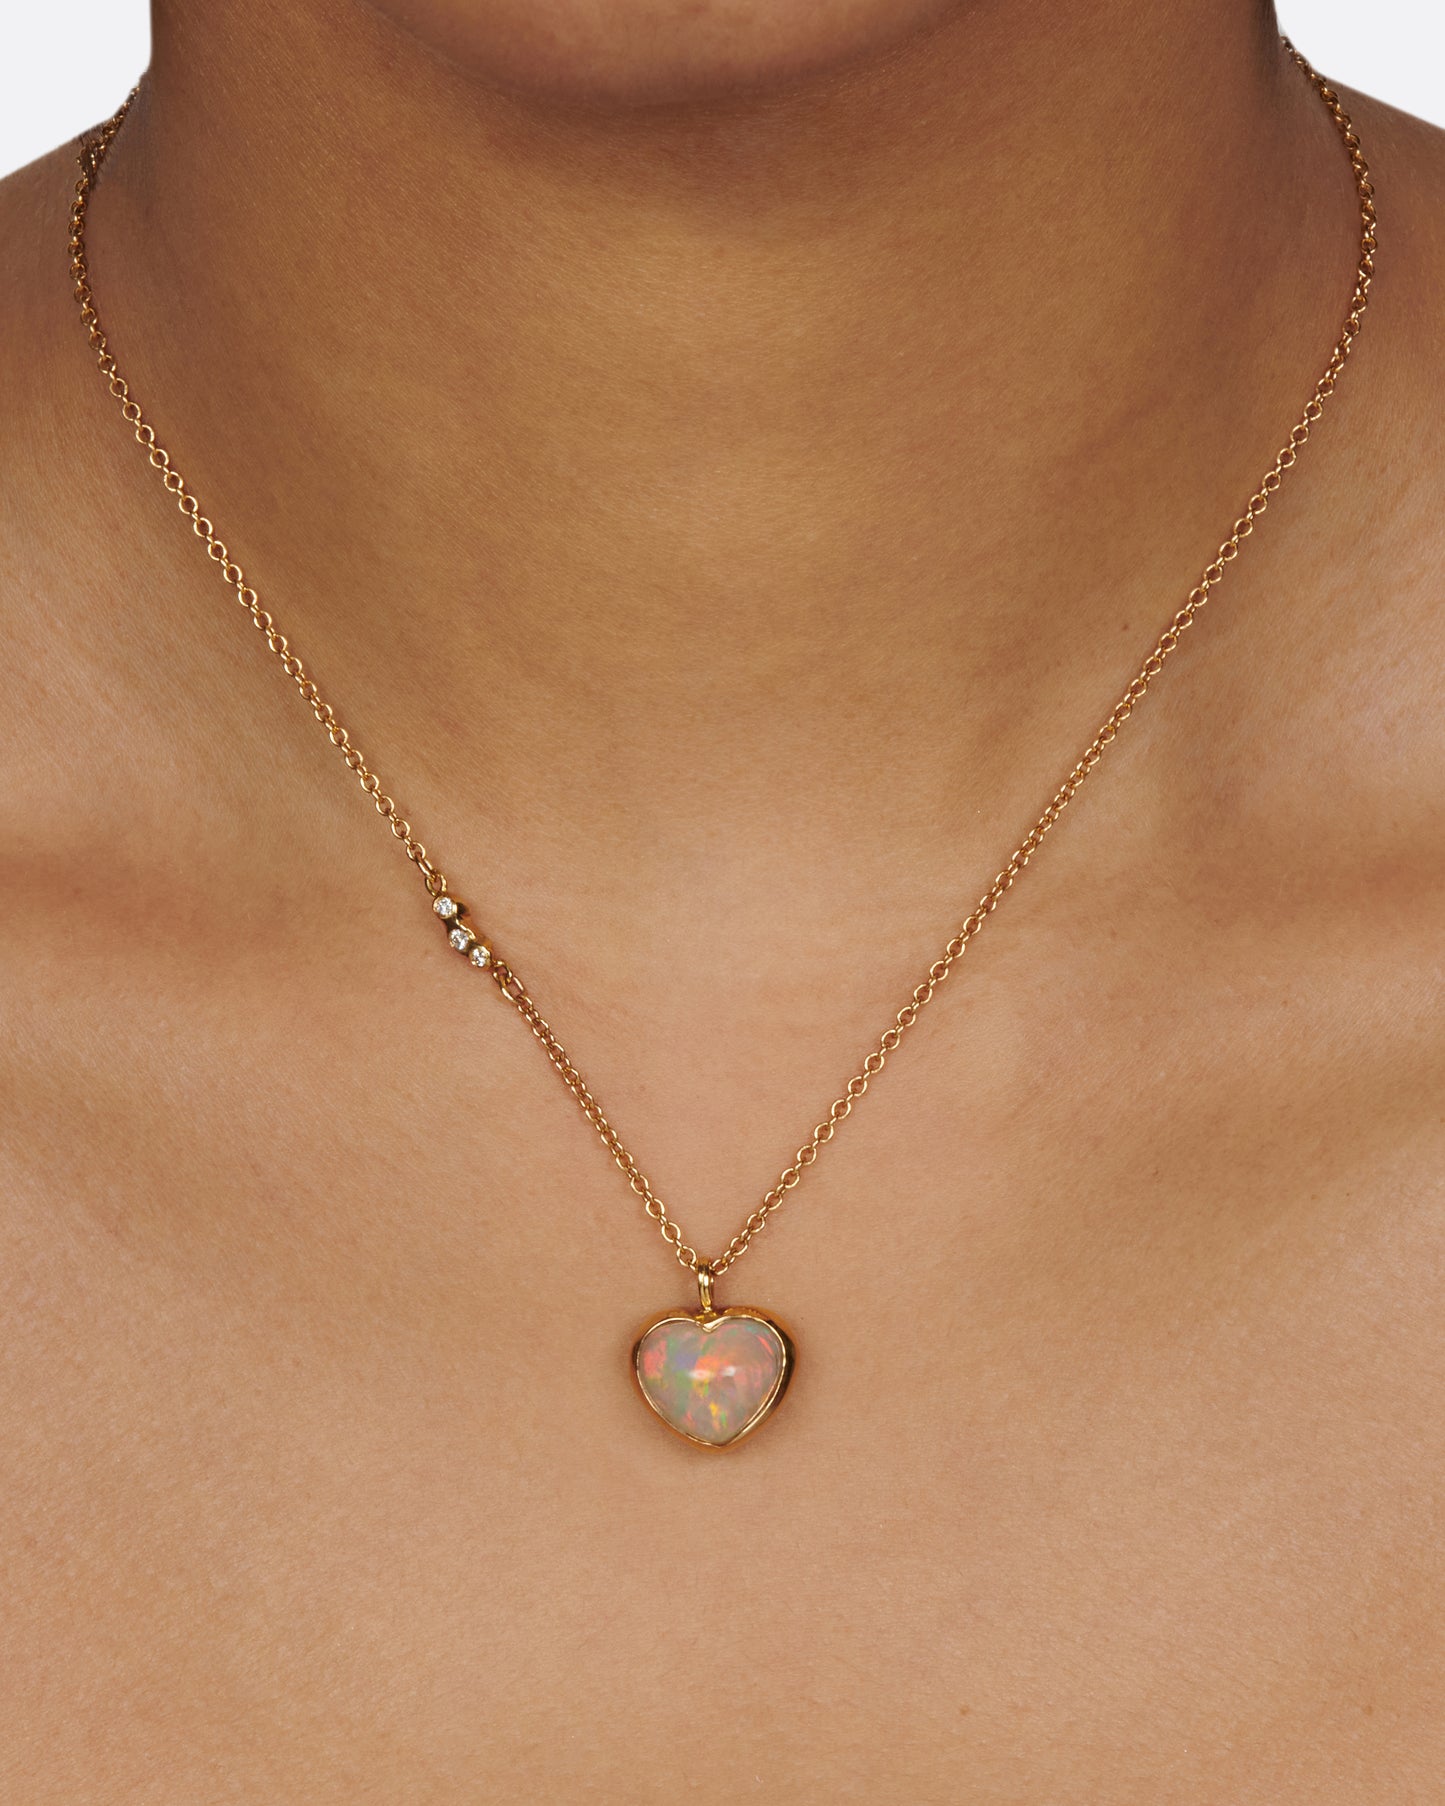 A glorious, bubble-like, Australian opal heart pendant whose fire can be seen from every angle.